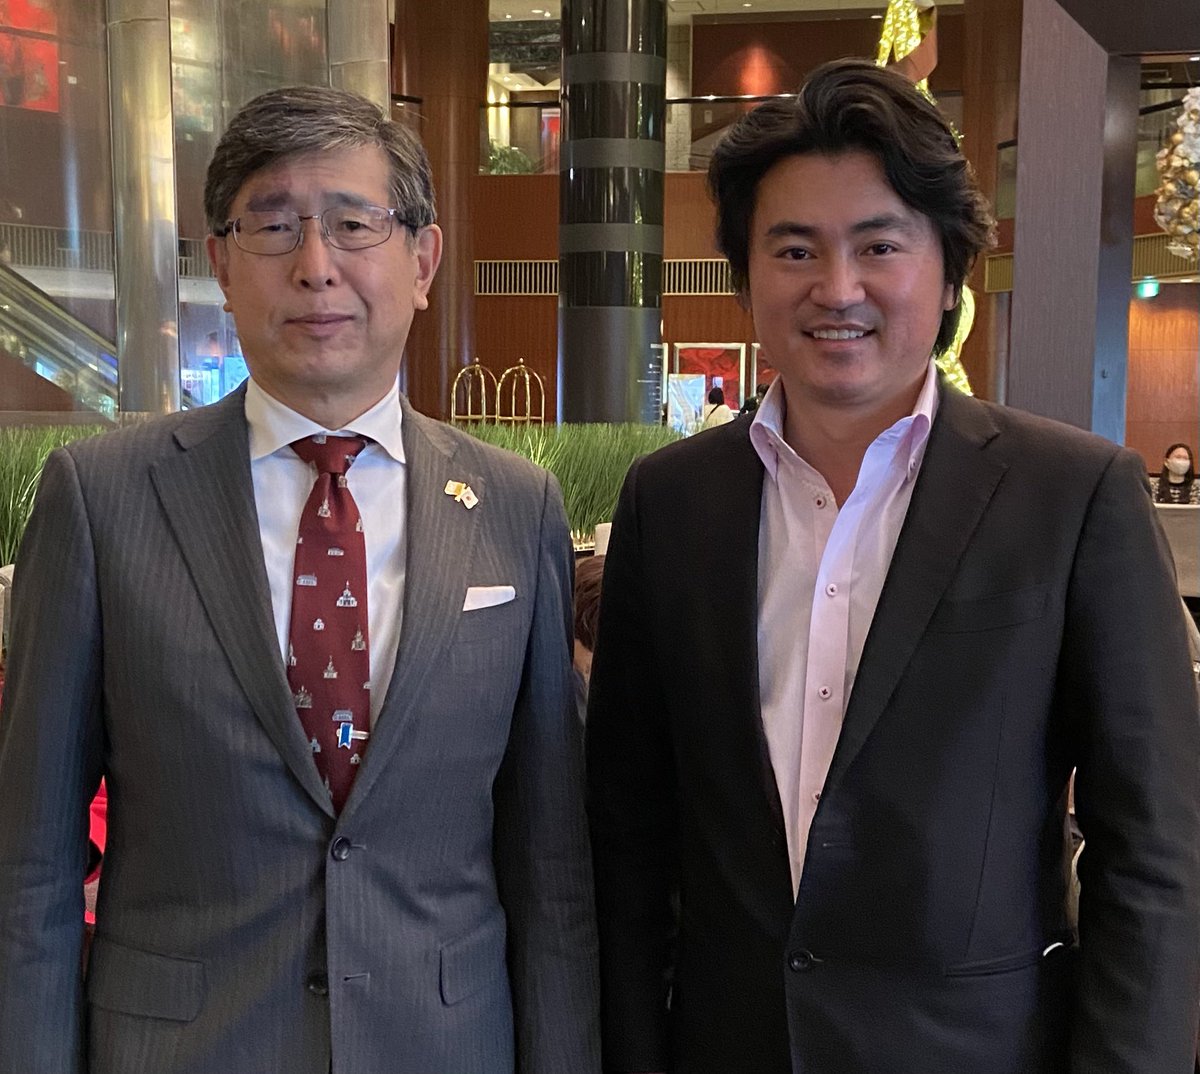 My pleasure to see again Mr. Akira Chiba, the Japanese Ambassador to Vatican🇯🇵🇻🇦in Tokyo. Amb. Chiba was Japan’s Consul General in Los Angeles and Ambassador to ASEAN before. I’ve been to Vatican @Pontifex before a while ago and loved it! Looking forward to promote @VaticanNews!